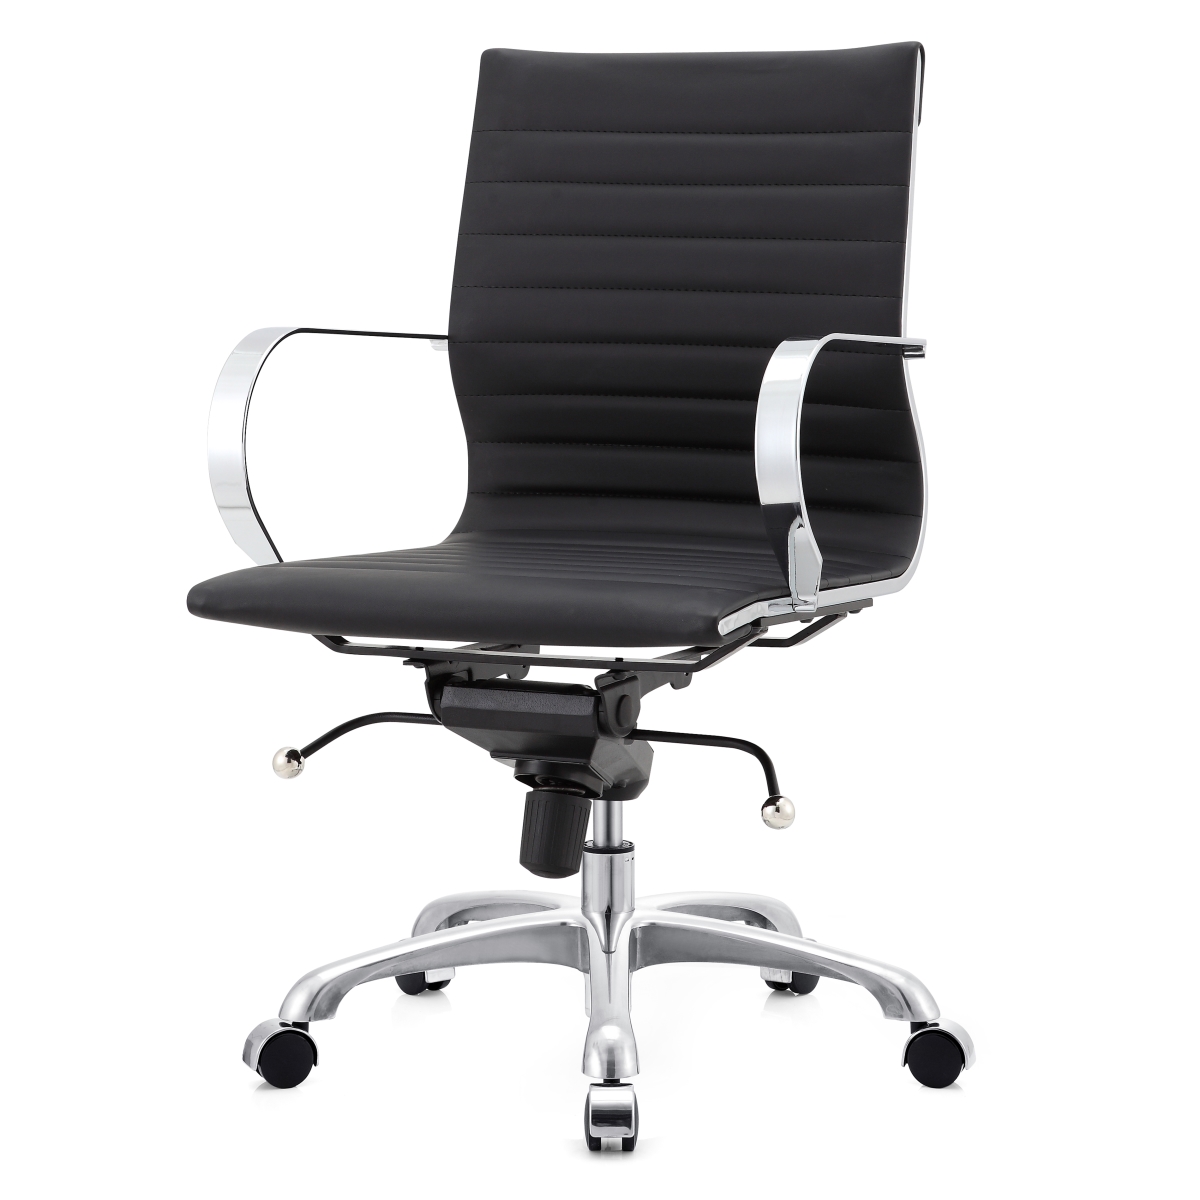 365-blk M365 Office Chair In Vegan Leather - Chrome & Black